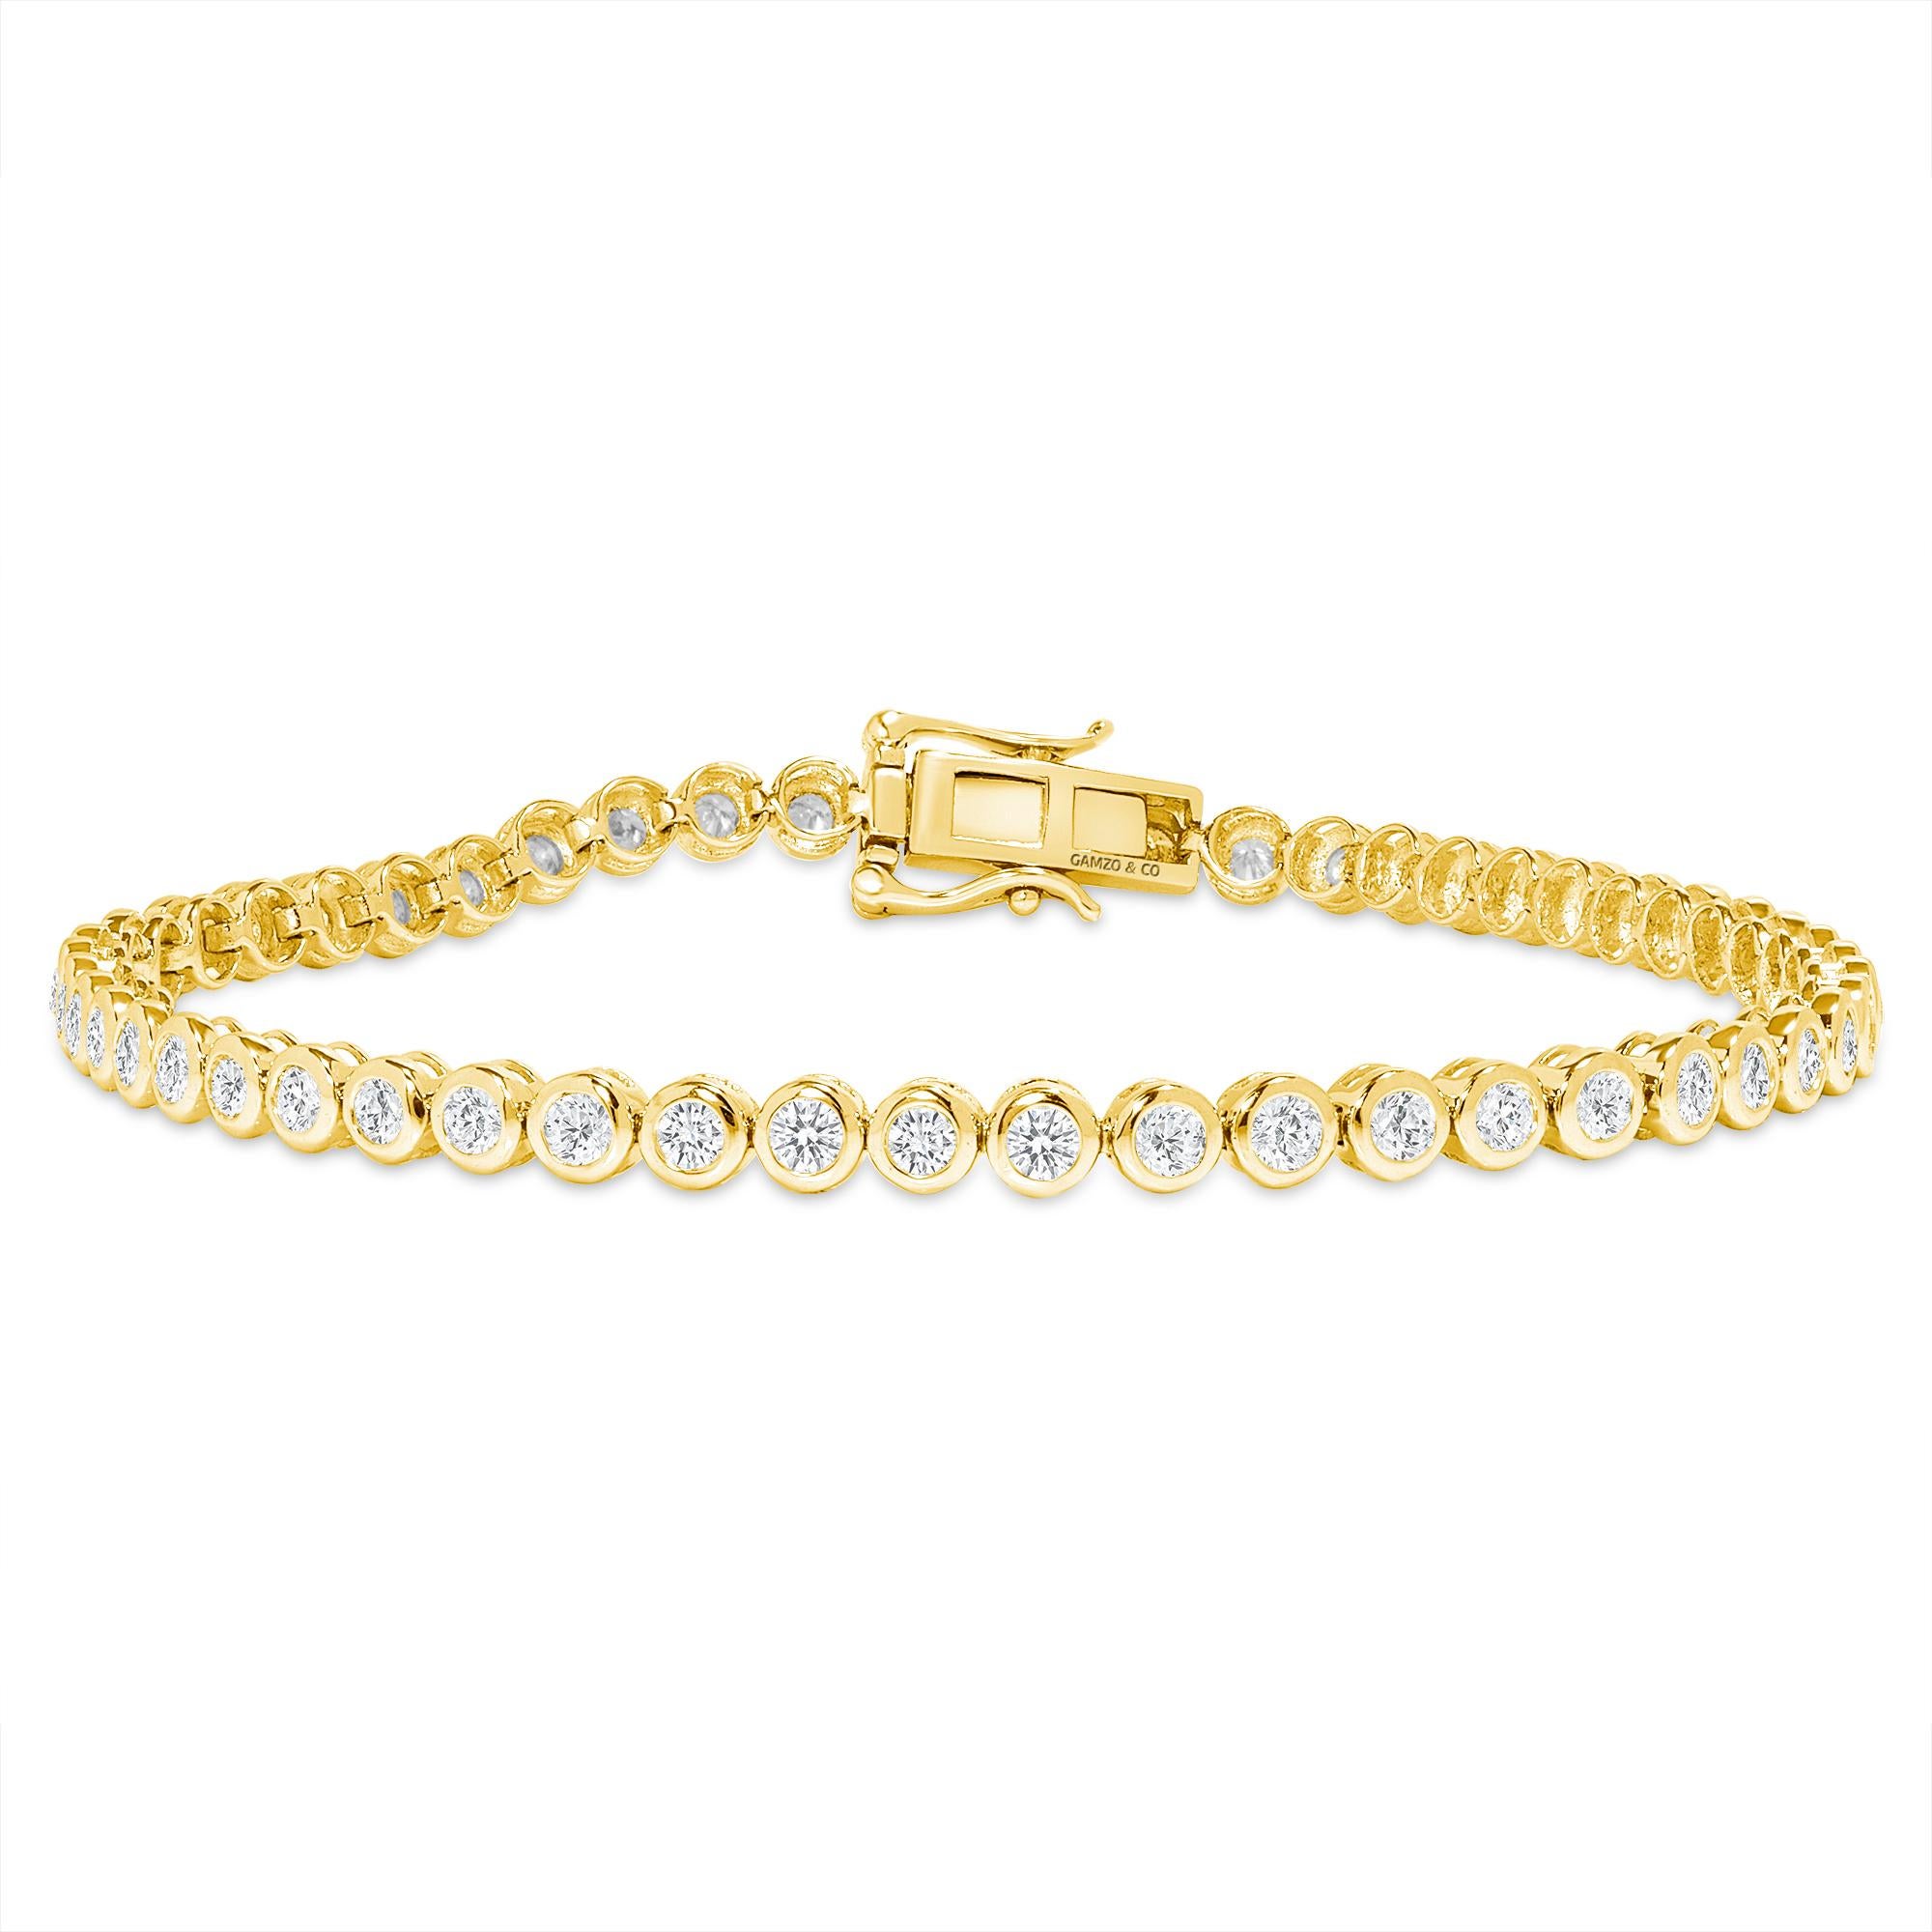 These beautiful round diamonds dance around your wrist as they absorb light and attention.
Metal: 14k Gold
Diamond Cut: Round
Diamond Total Carats: 3ct
Diamond Clarity: VS
Diamond Color: F
Color: Yellow Gold
Bracelet Length: 5.5 Inches 
Included